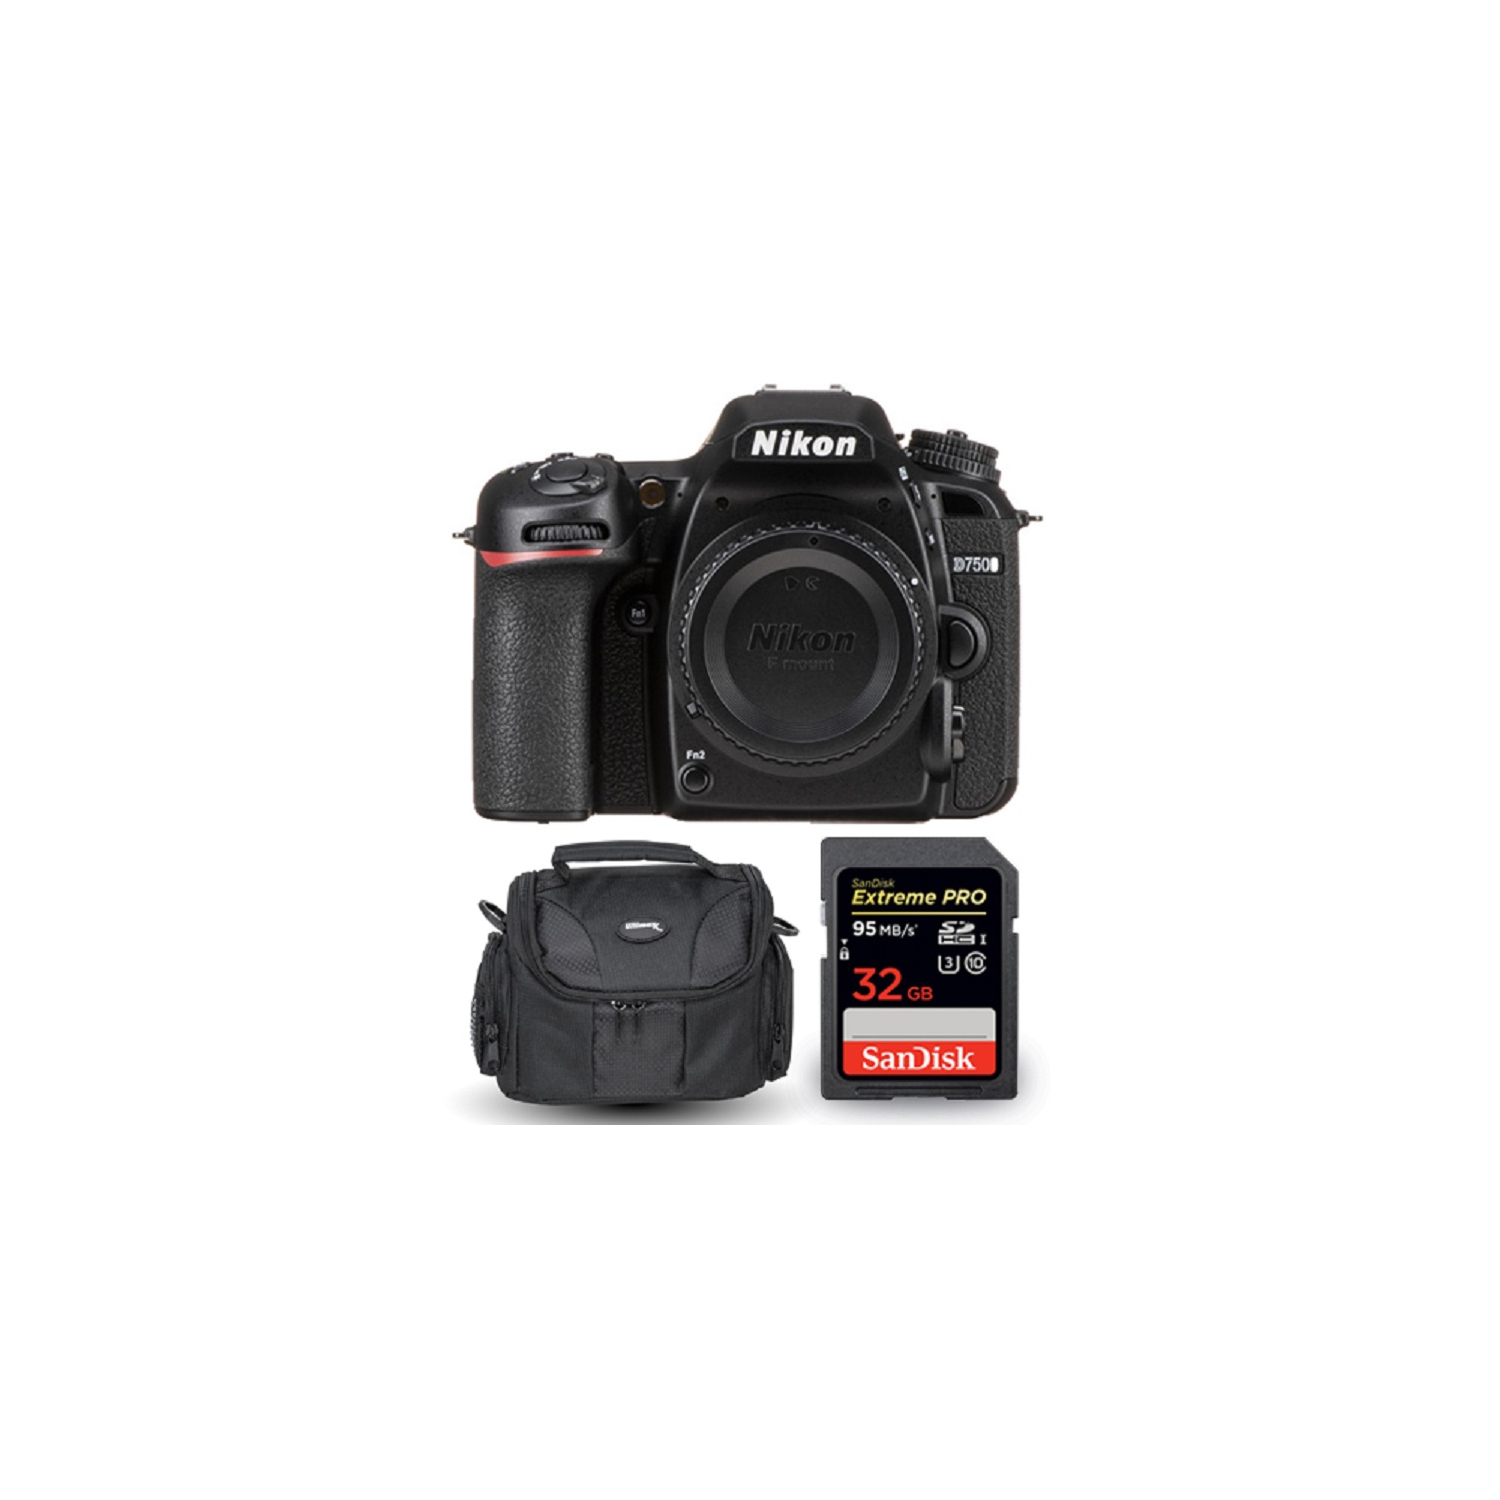 Nikon D7500 4K Camera (Body Only) 1581 + Sandisk Extreme Pro 32GB SD and Case